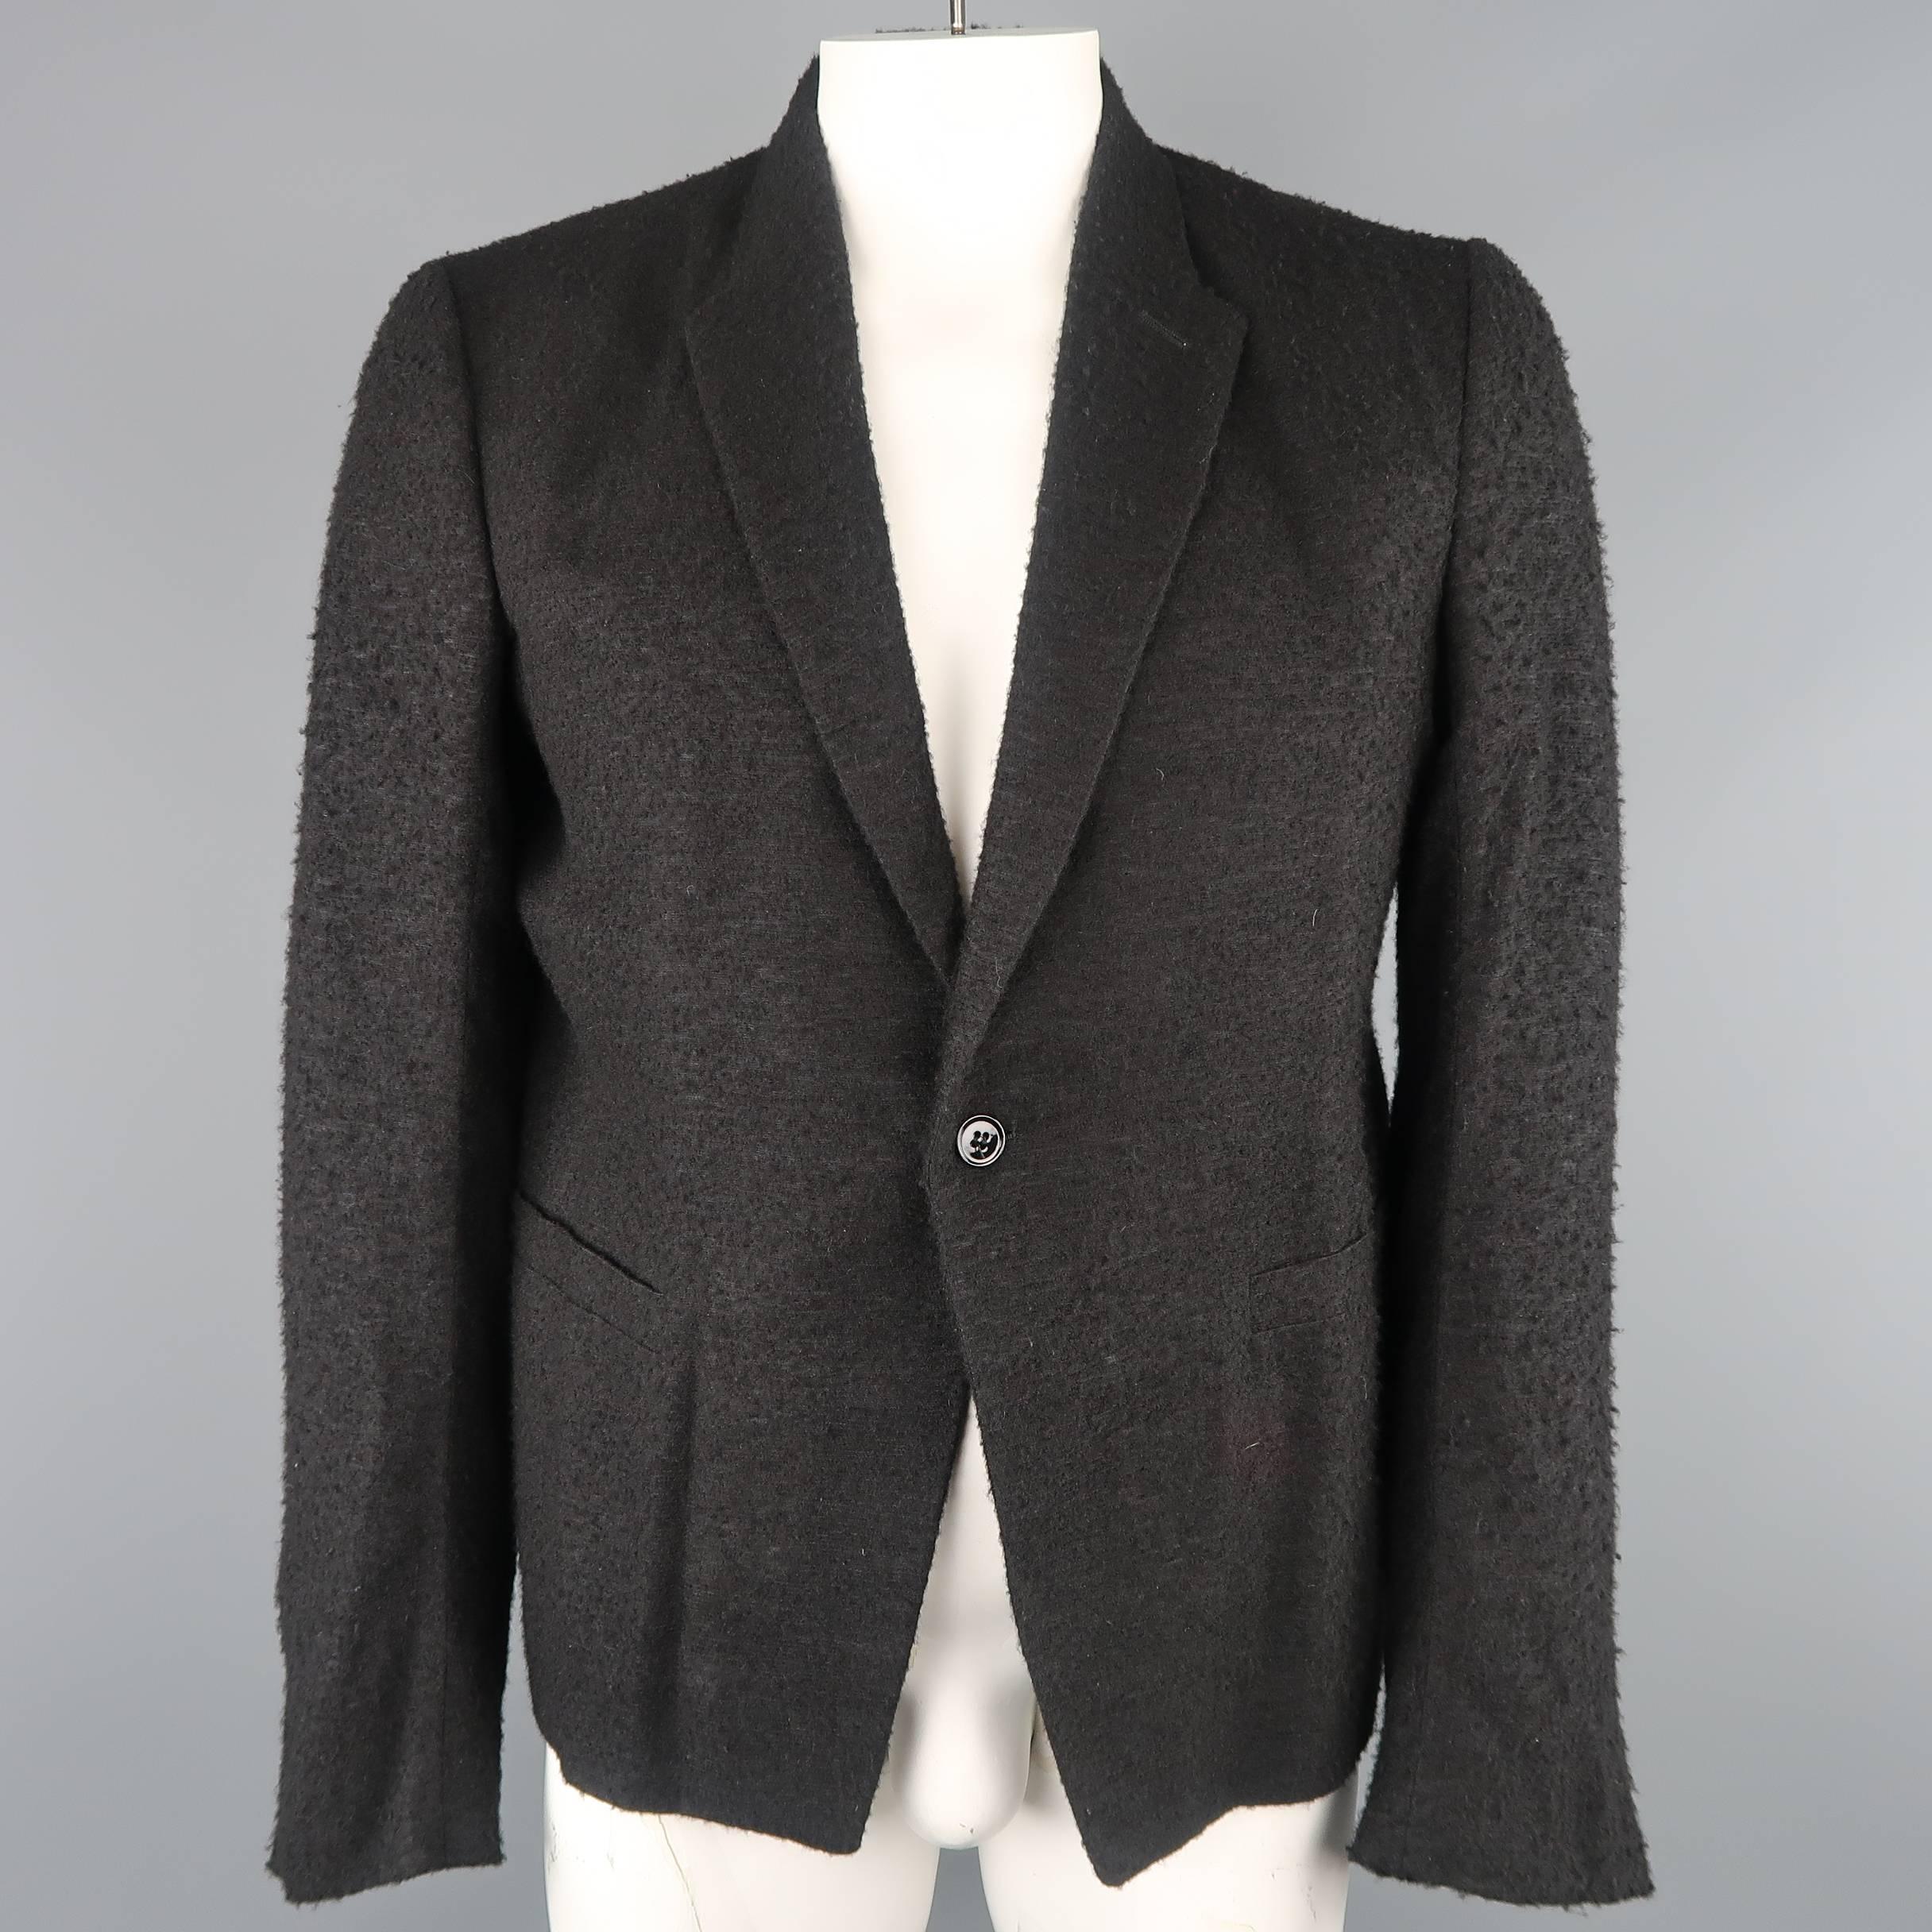 RICK OWENS F/W 2012/13 jacket comes in a pilled textured cashmere blend material with a notch lapel, single button closure, functional button cuffs, and belted waist. Made in Italy.
 
Good Pre-Owned Condition.
Marked: USA 46
 
Measurements:
